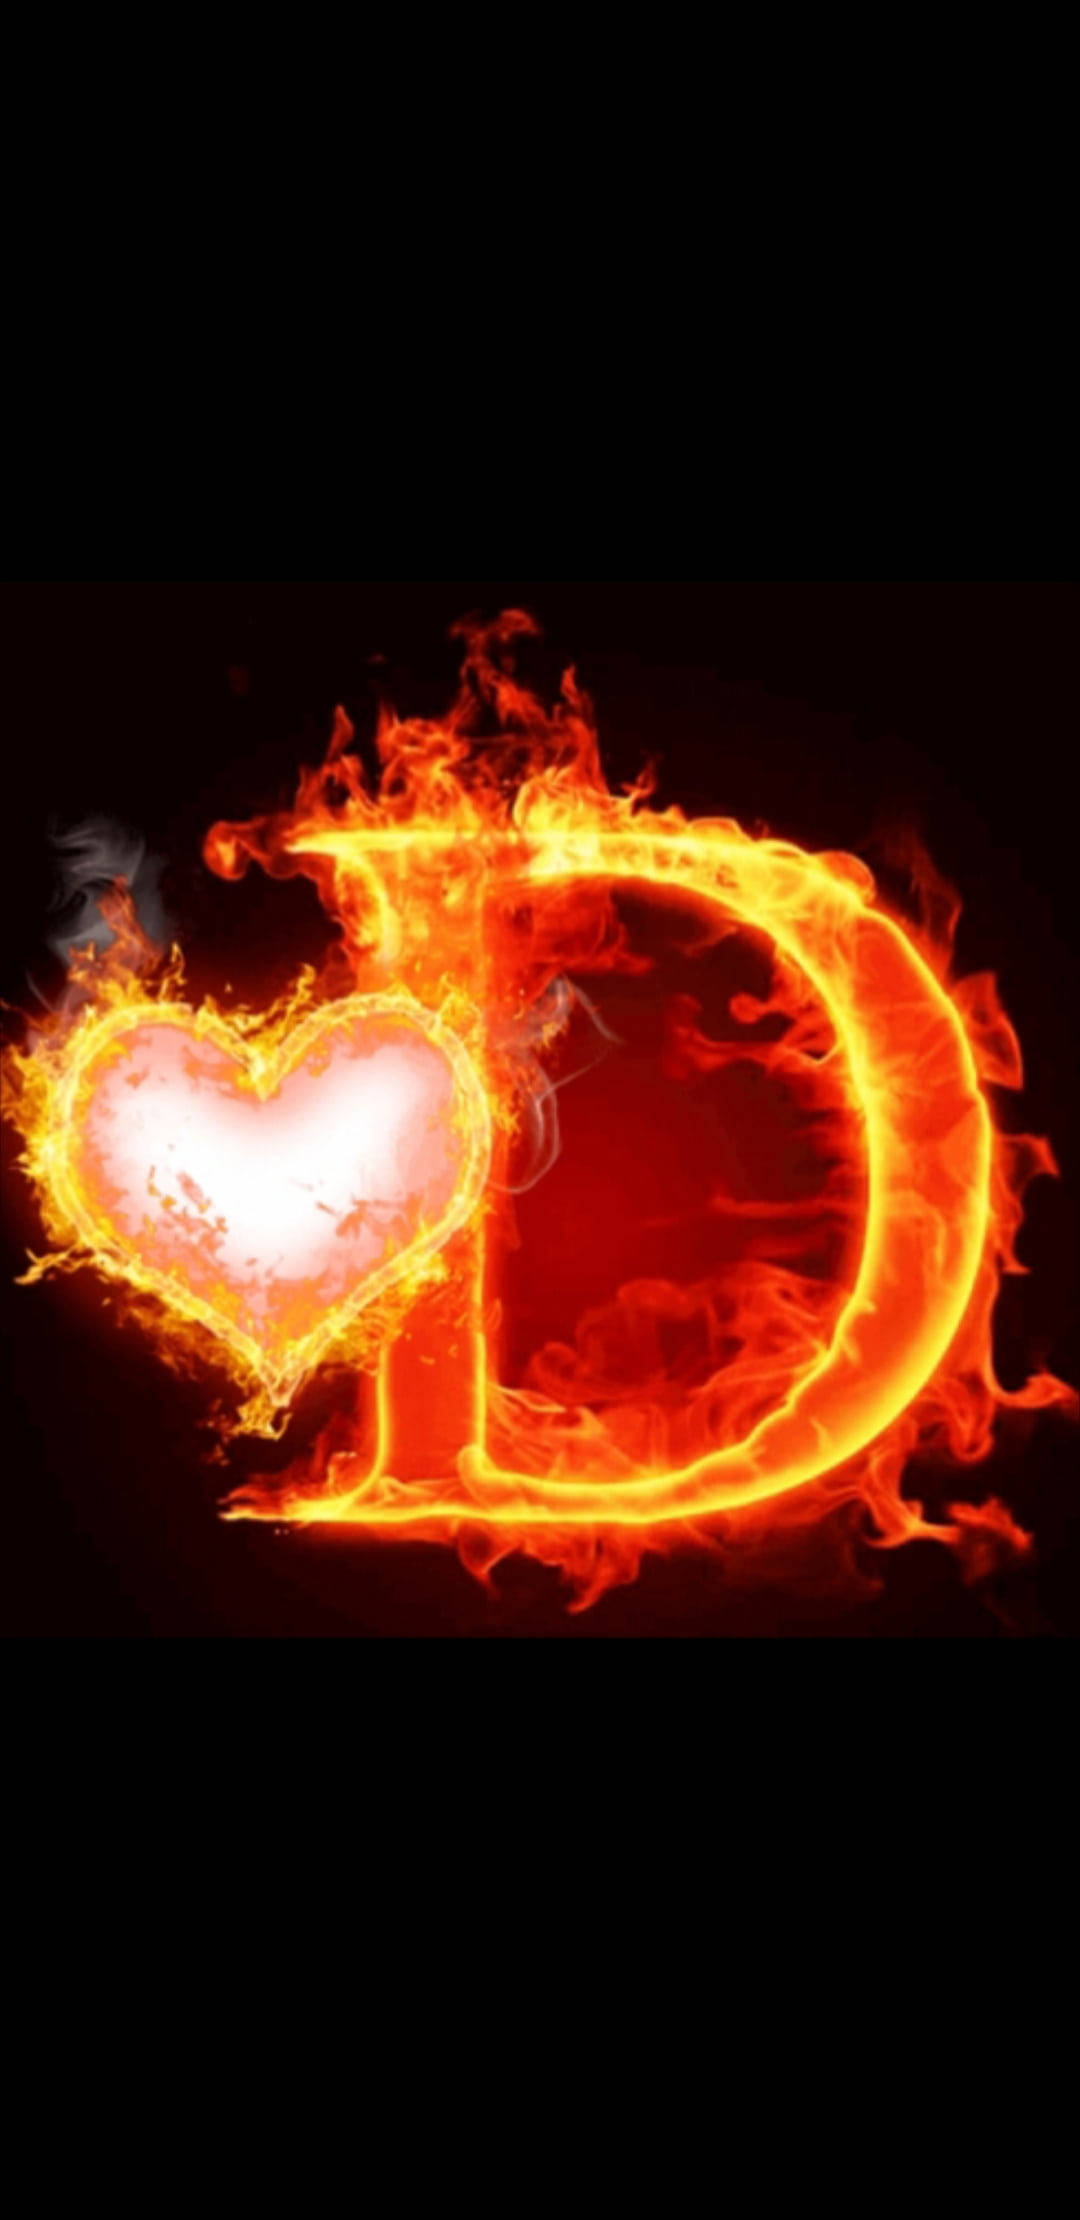 Download Burning Heart With Letter D Wallpaper 